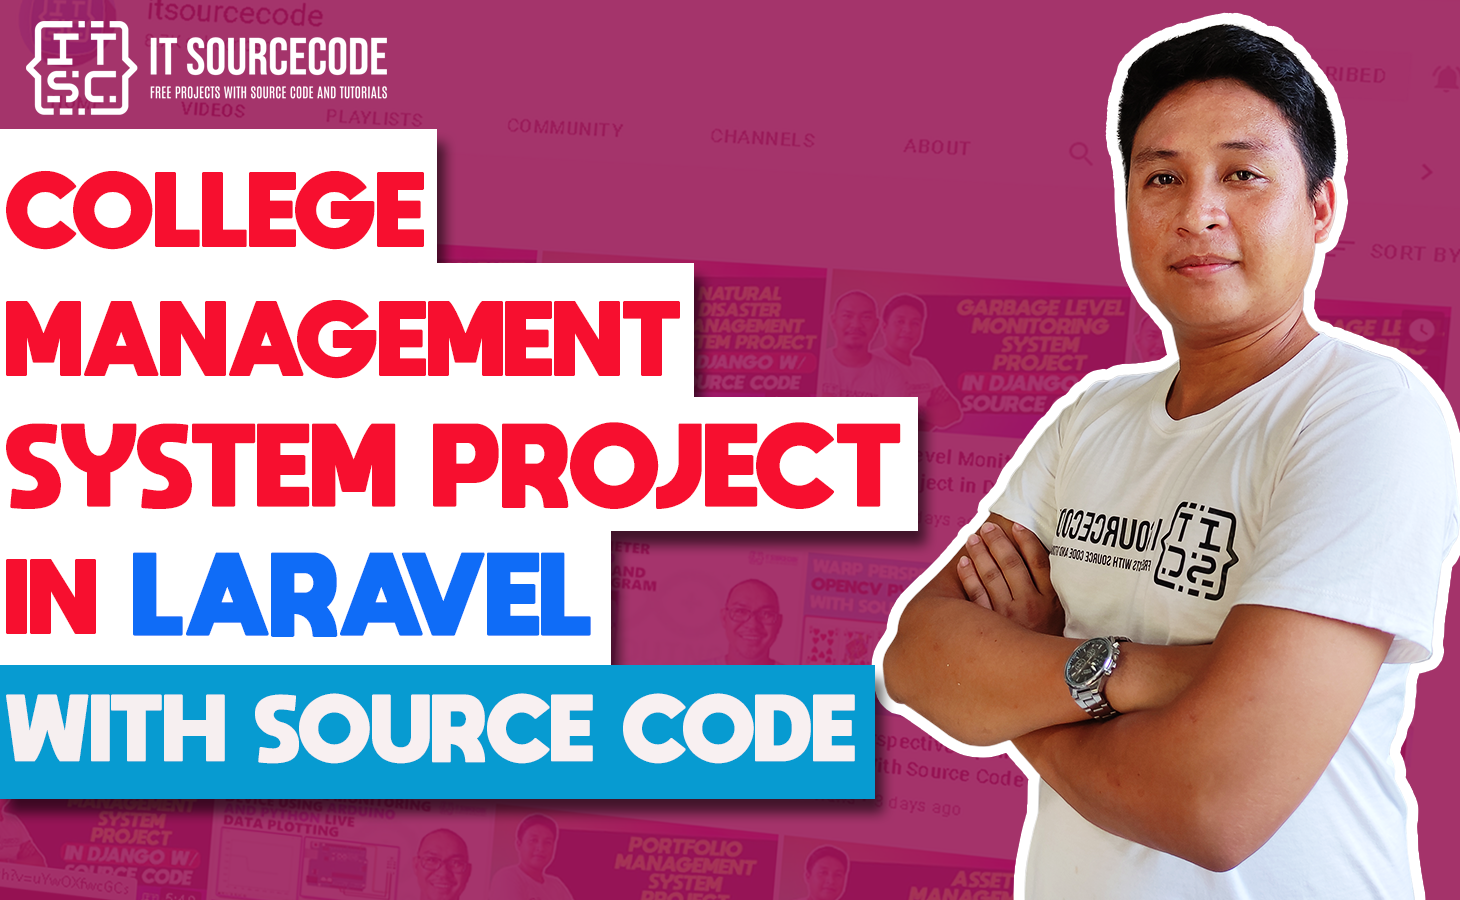 College Management System Project in Laravel with Source Code